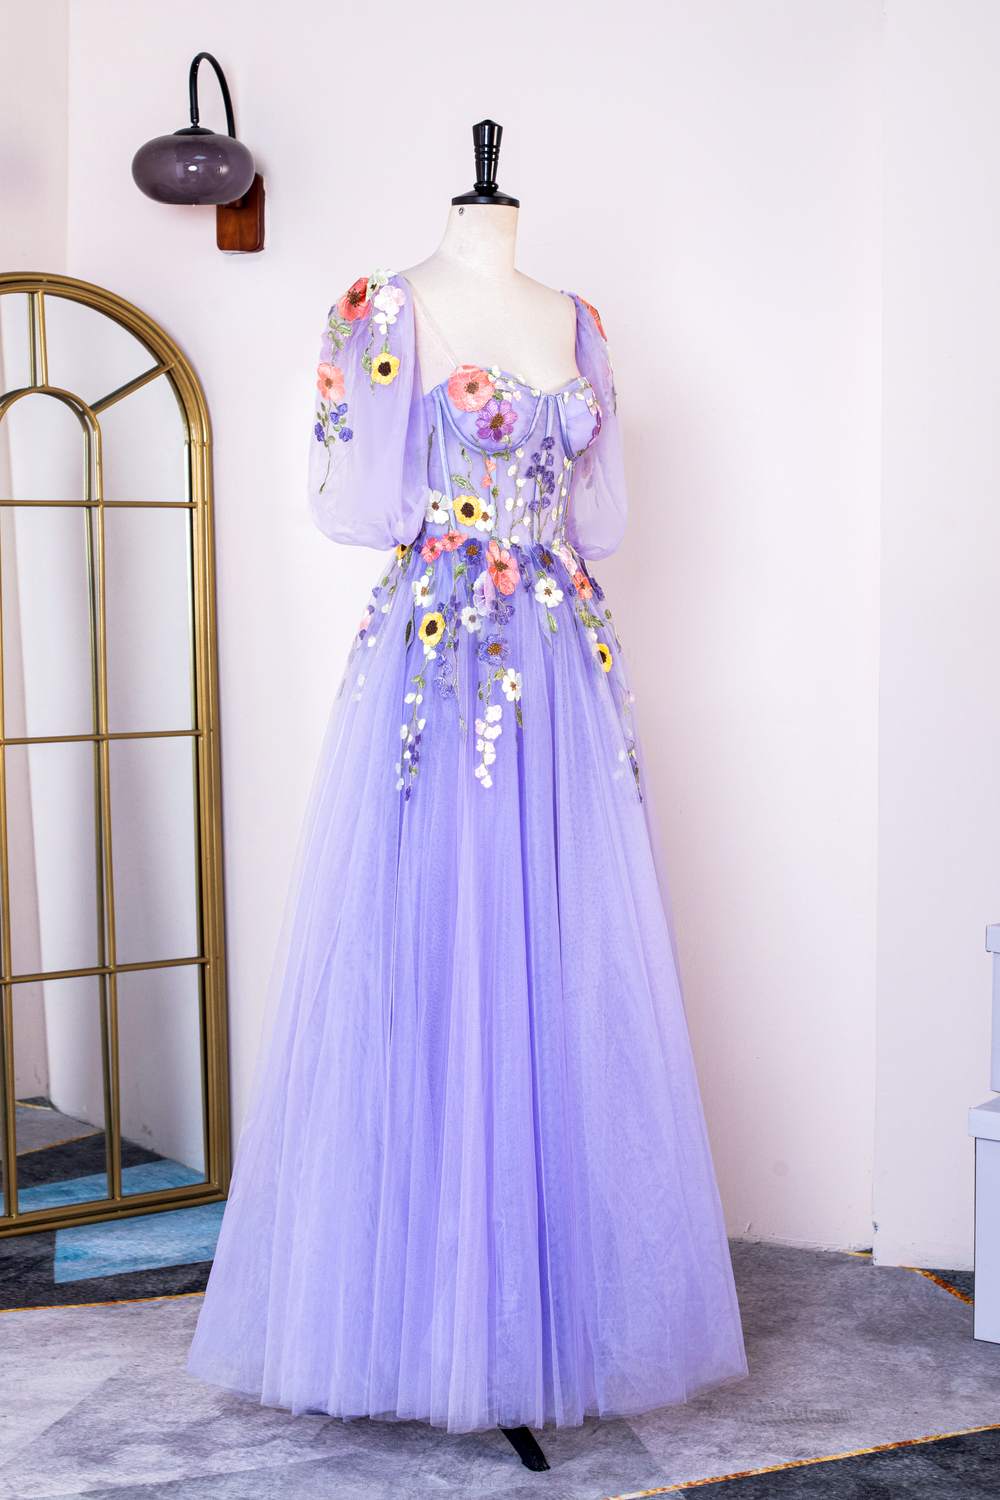 Lavender Puff Sleeves Floral Appliques A-line Long Prom Dress